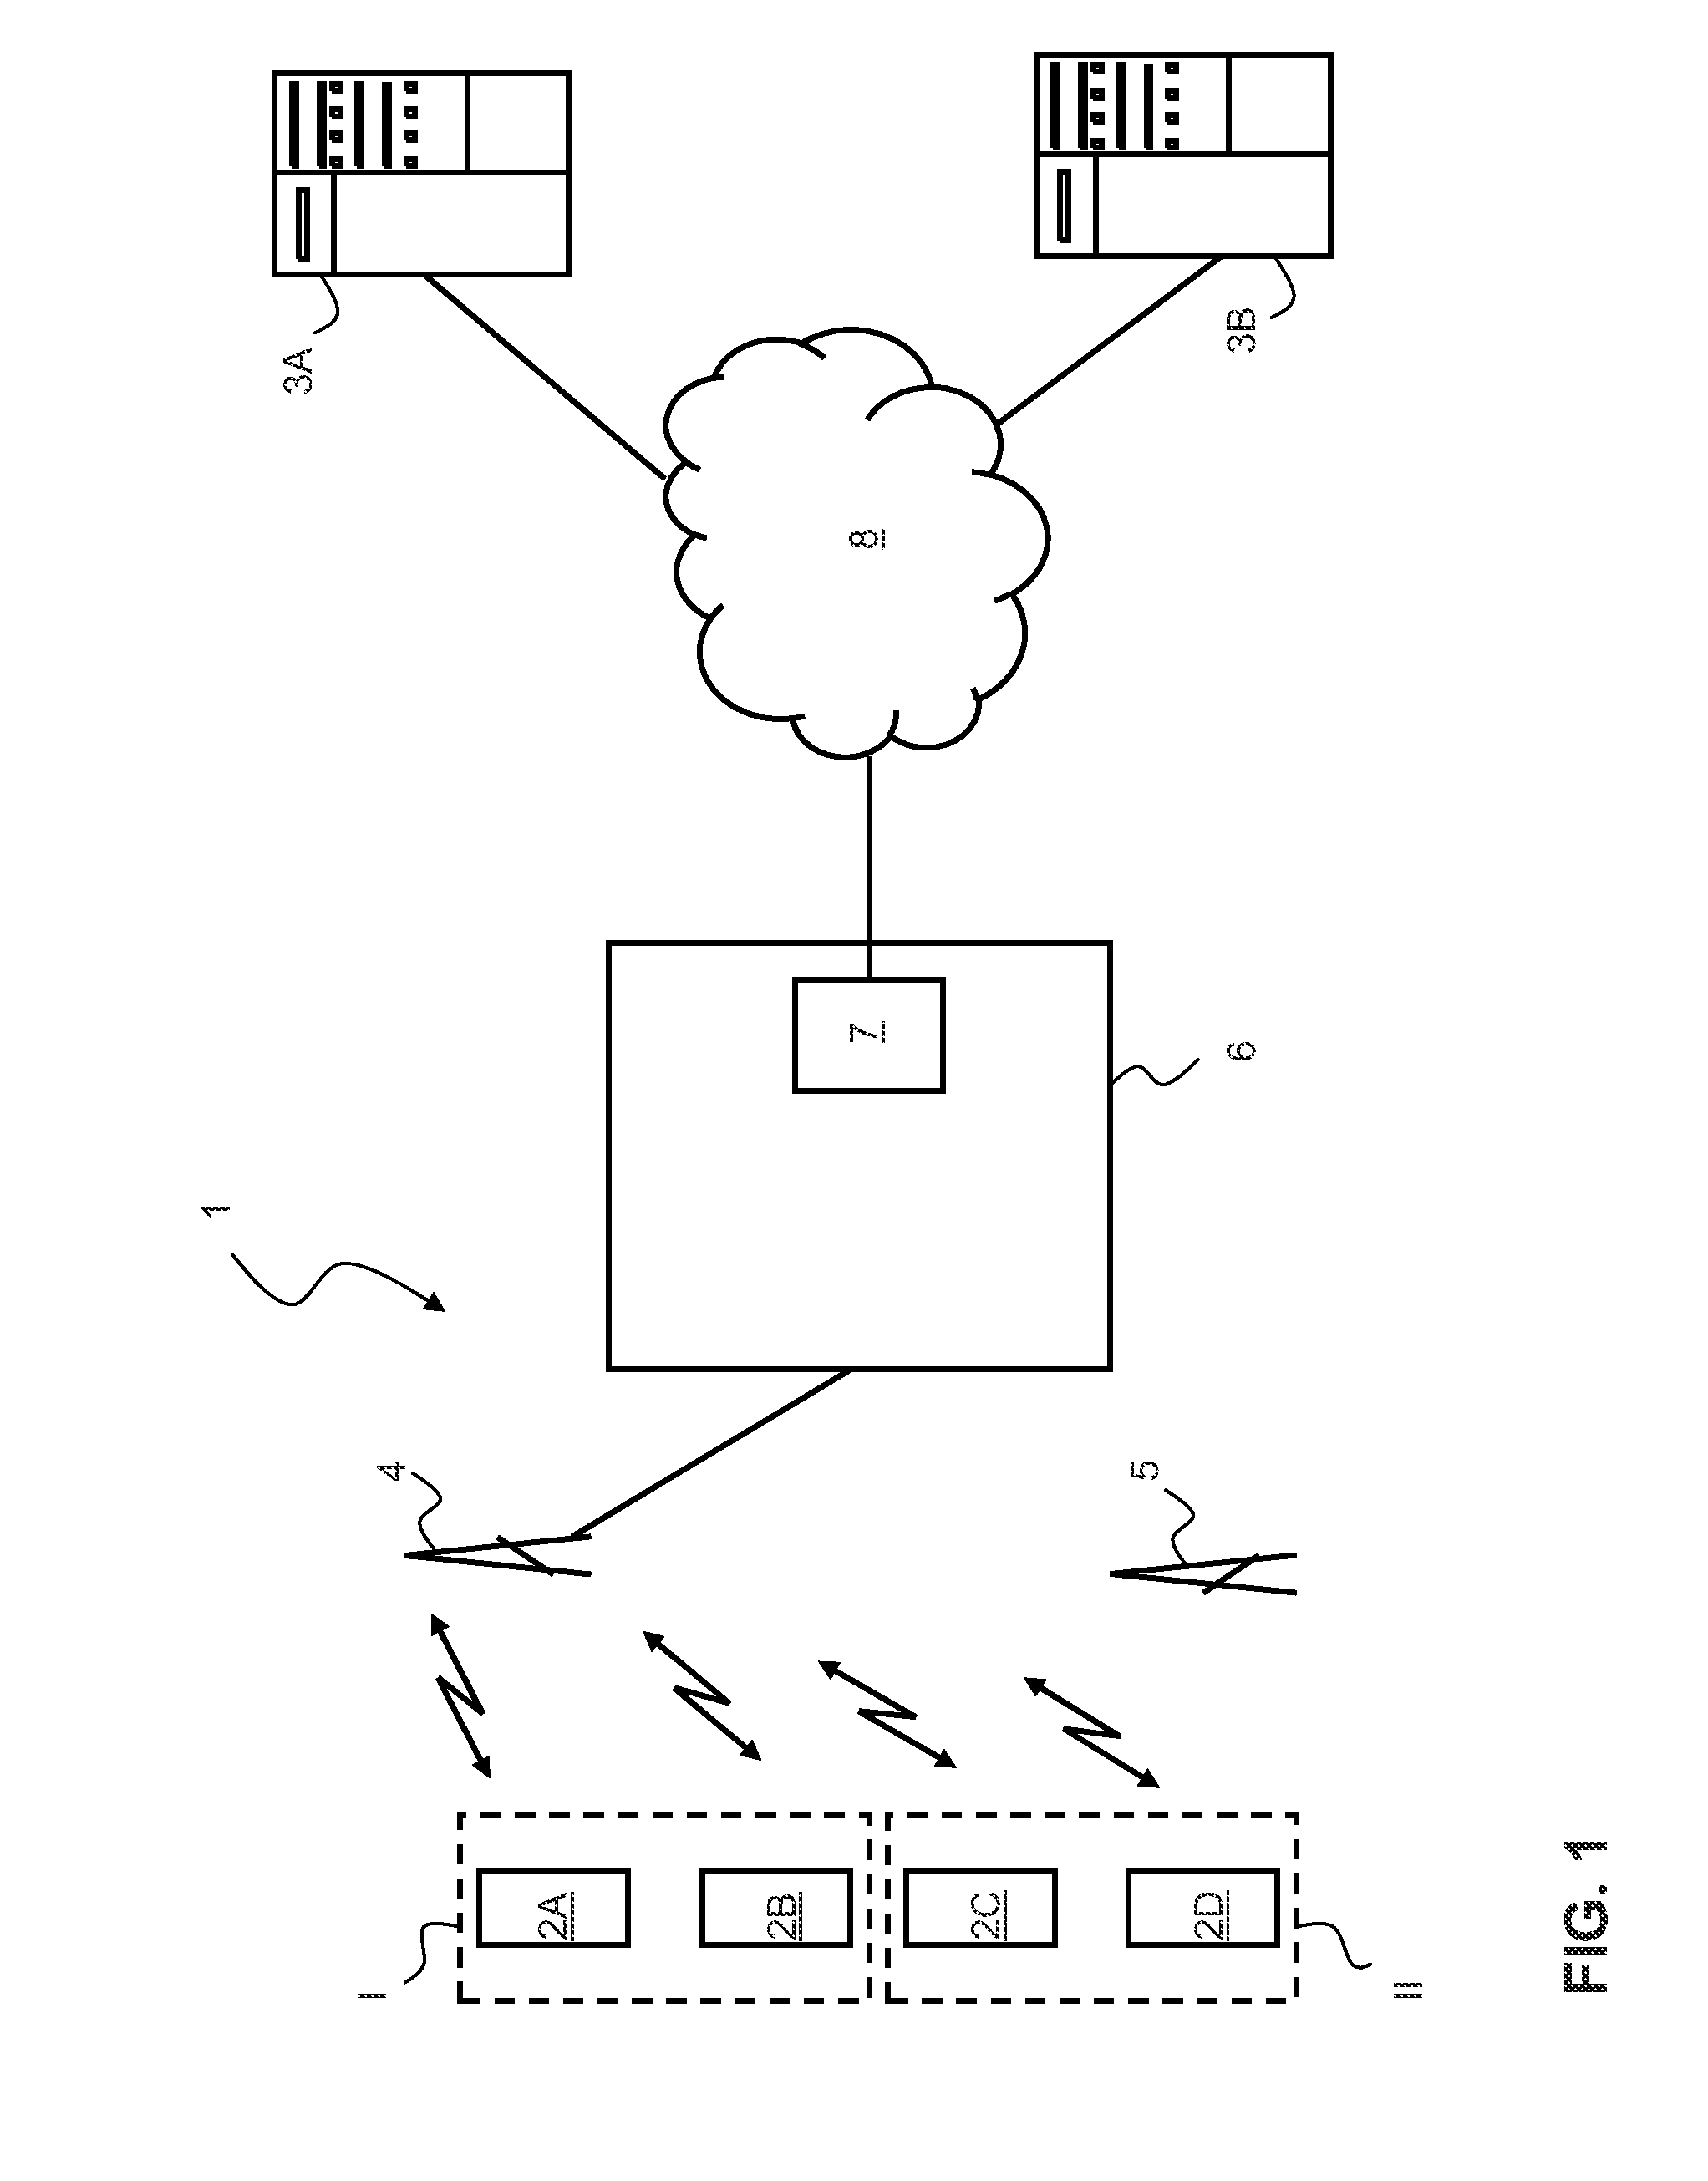 Method for Transferring Data from a Plurality of SIM-Less Communication Modules